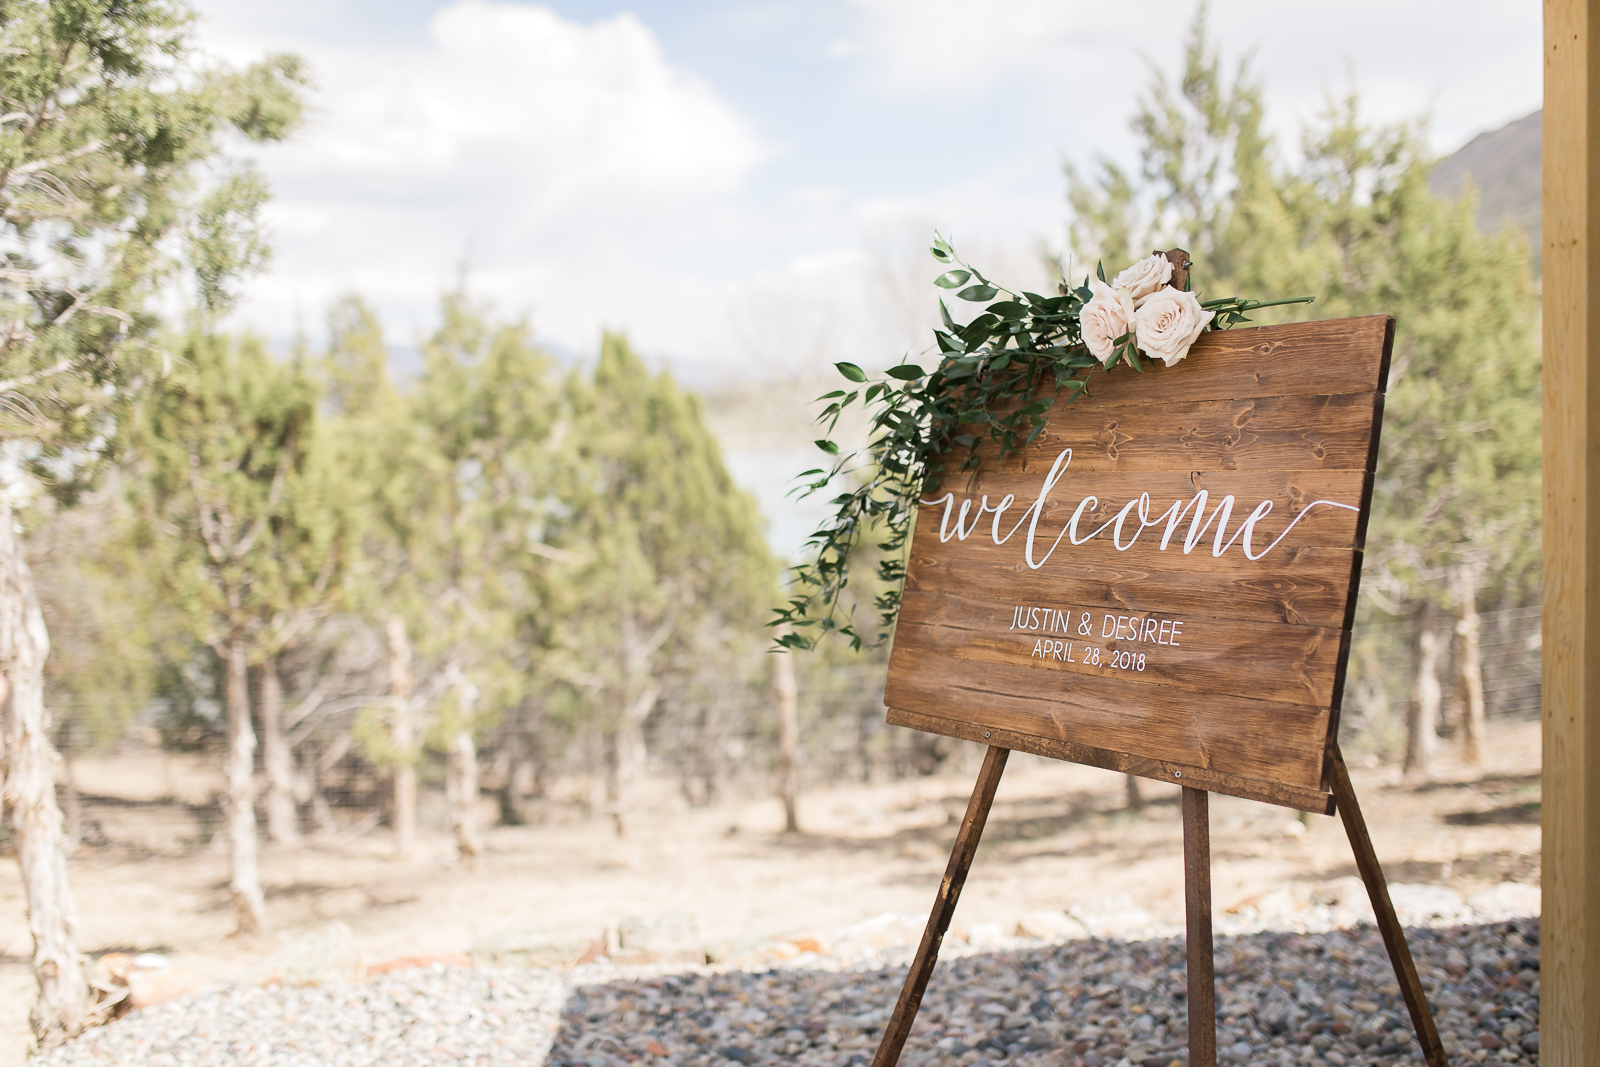 Desiree and Justin's Romantic Western wedding at Vista View Events in Rifle, Colorado. Wedding Photography by Megan Lee Photography